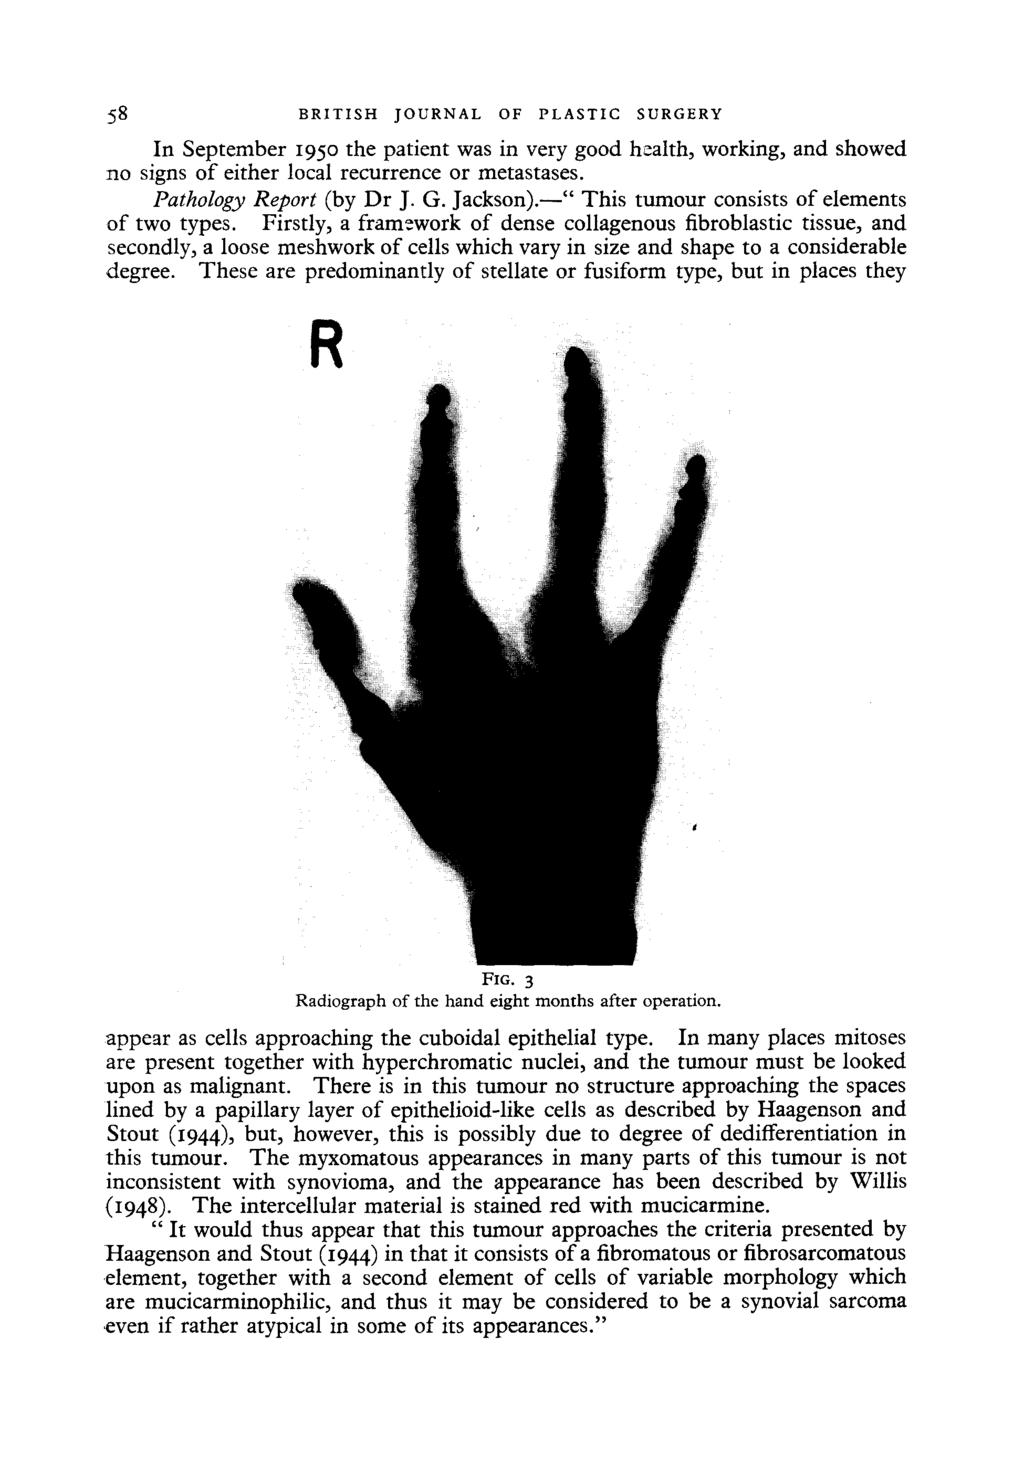 58 BRITISH JOURNAL OF PLASTIC SURGERY In September 195 the patient was in very good health, working, and showed no signs of either local recurrence or metastases. Pathology Report (by Dr J. G.